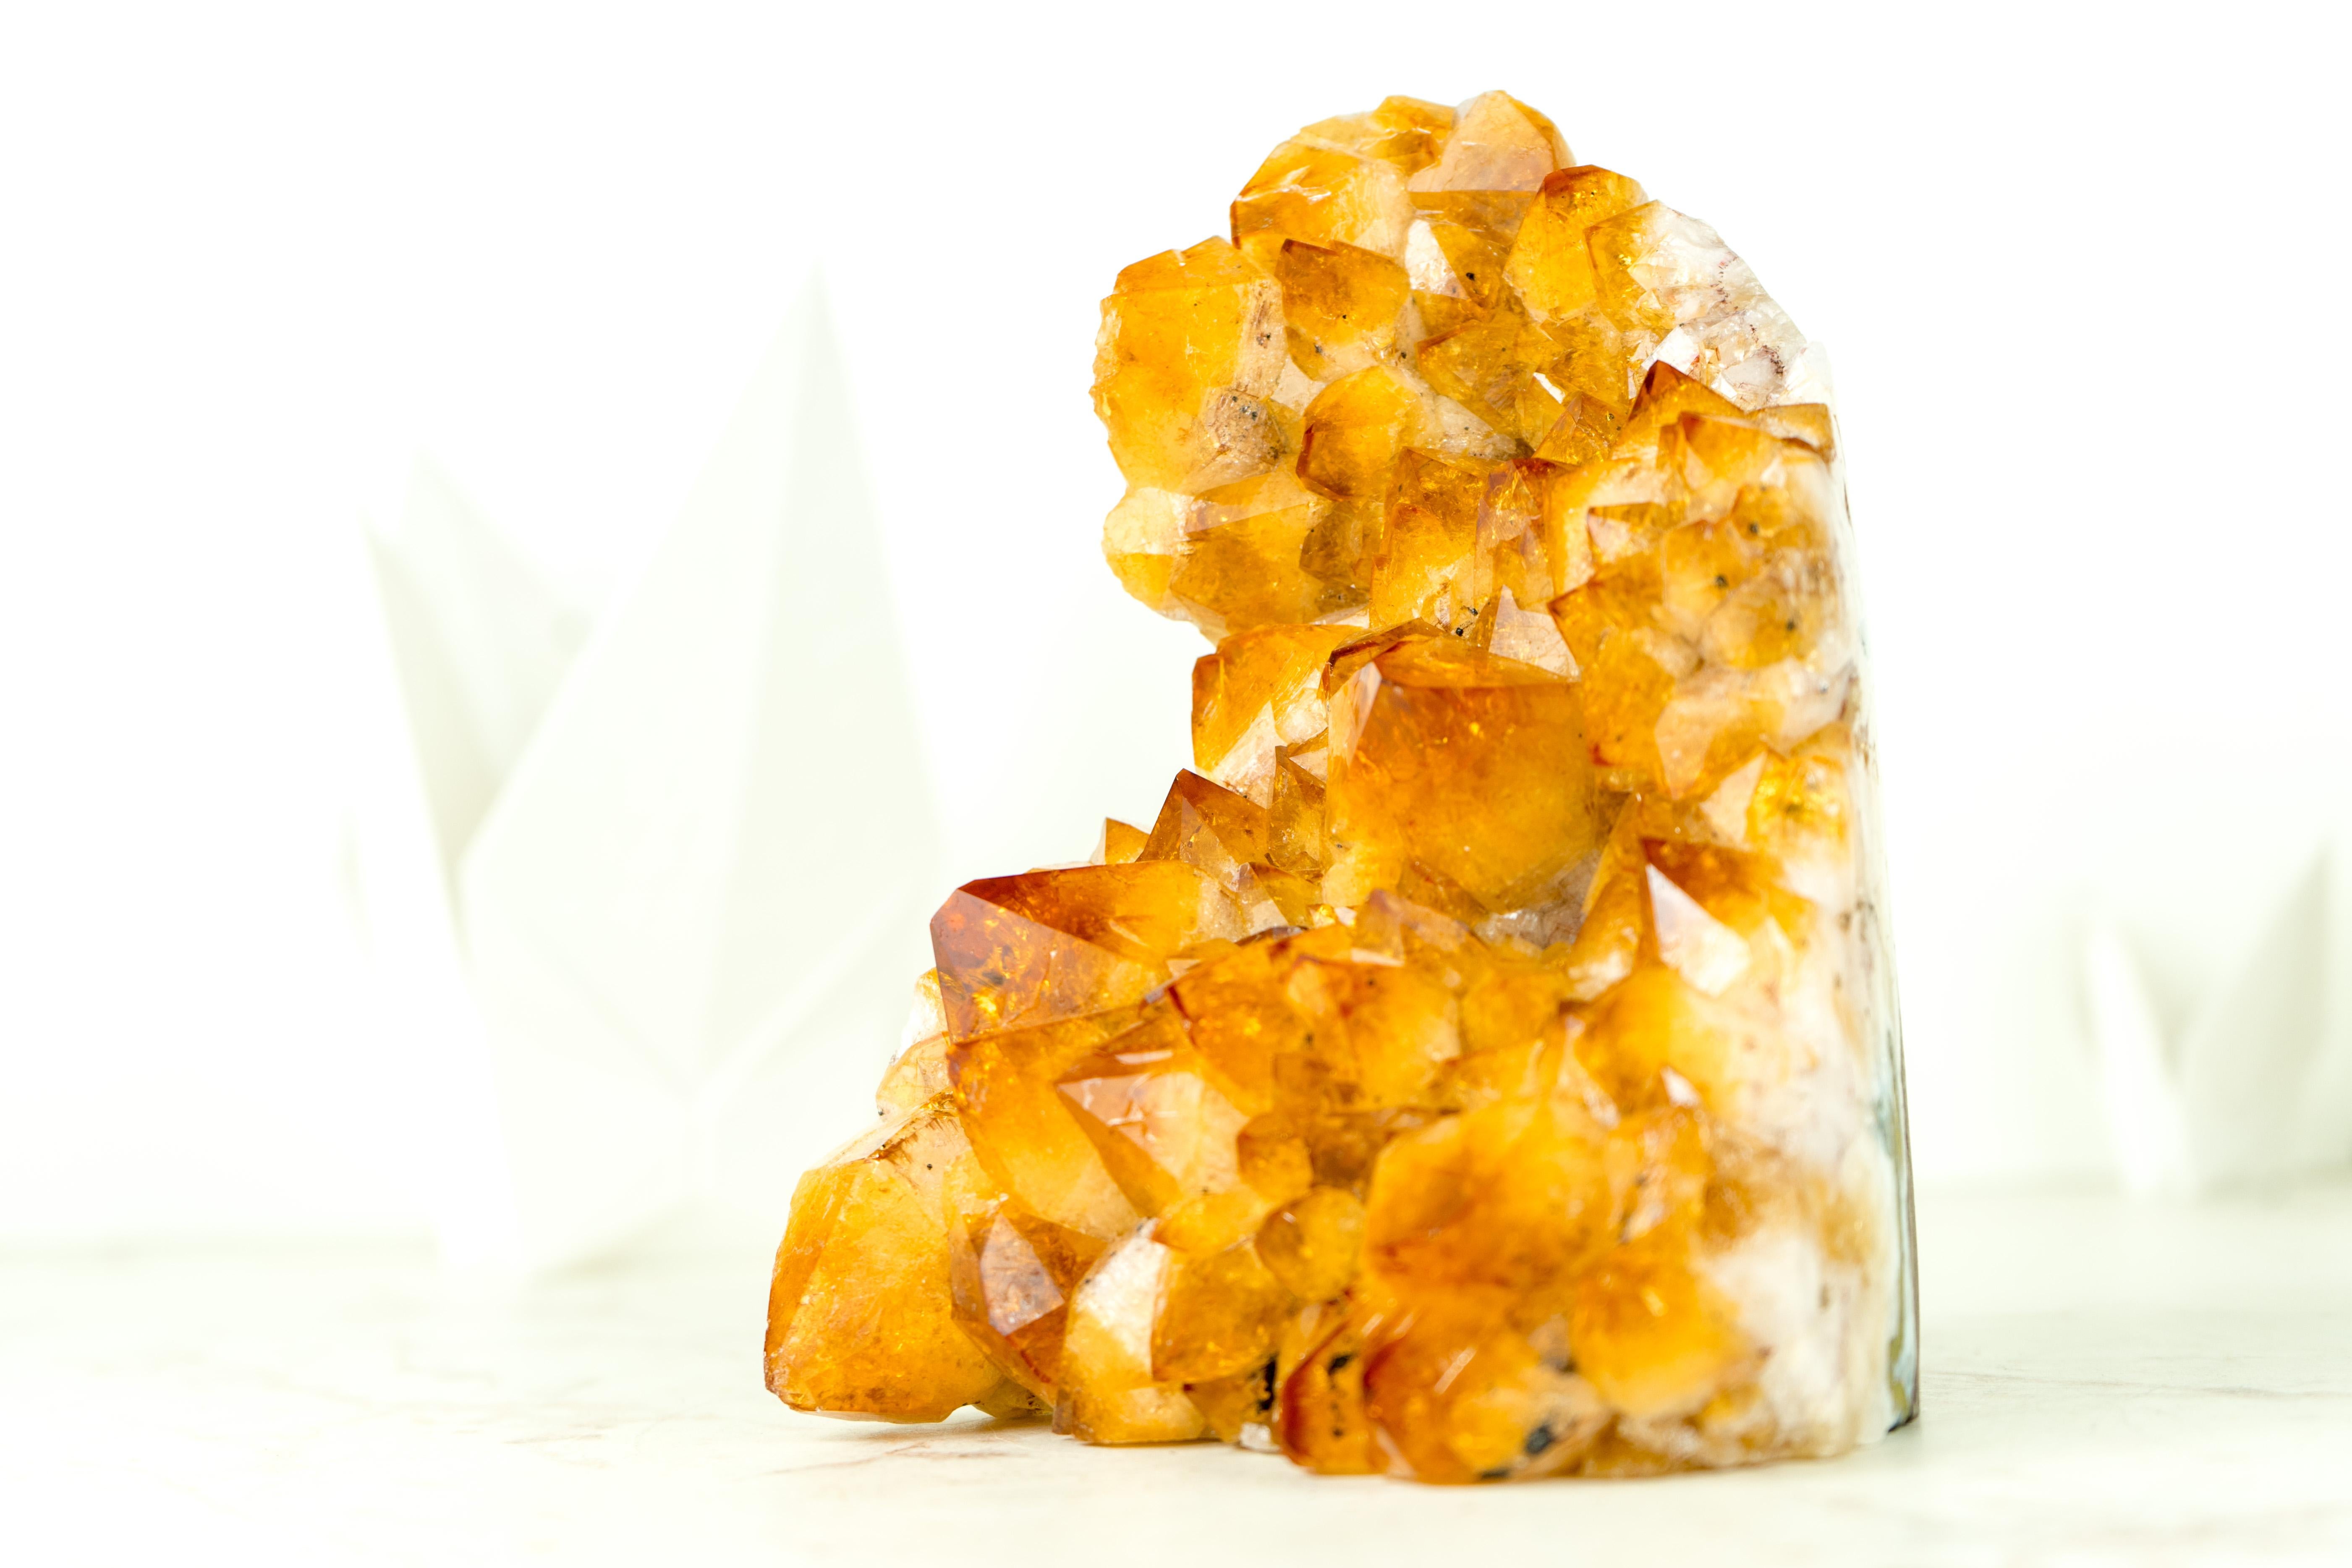 An extraordinary Citrine Cluster from Brazil that possesses world-class characteristics. Its deep, rich yellow tone brings beauty and elegance, making it a standout citrine for any collection, home decor, or energy healing. This remarkable Citrine